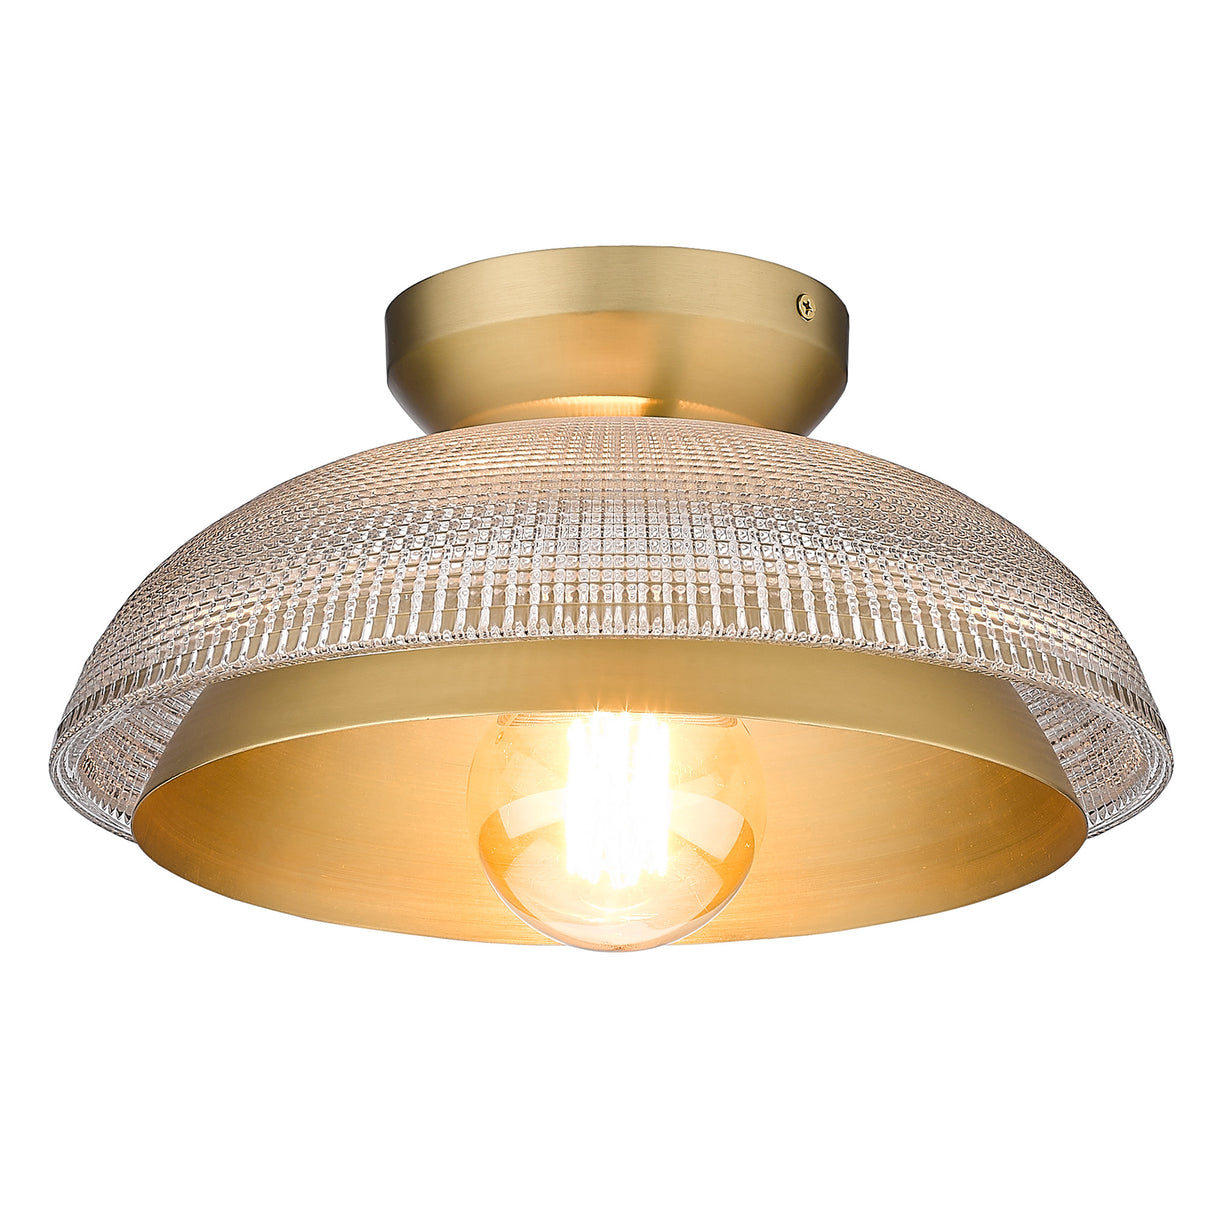 Crawford Flush Mount in Brushed Champagne Bronze with Retro Prism Glass Shade